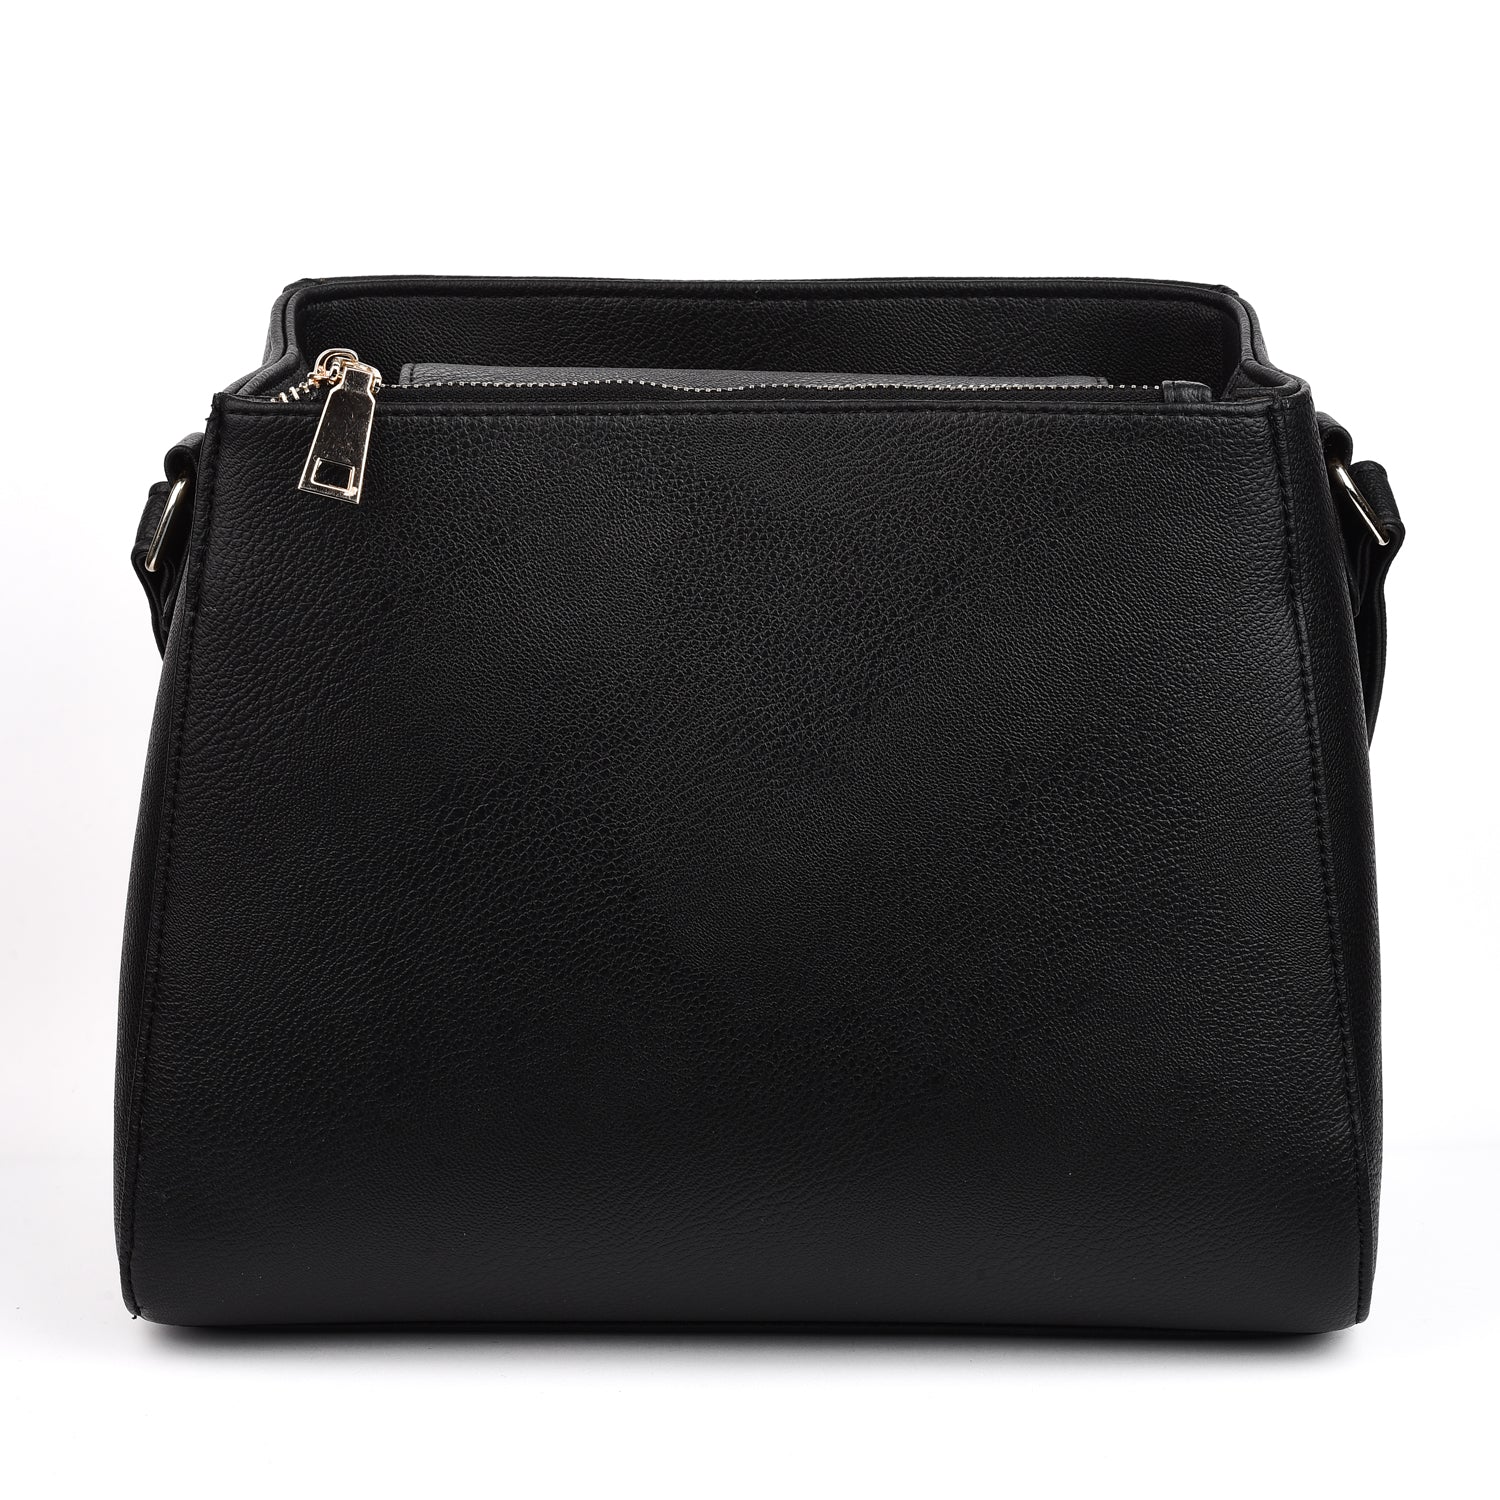 VYBE - Consent Bag - Black